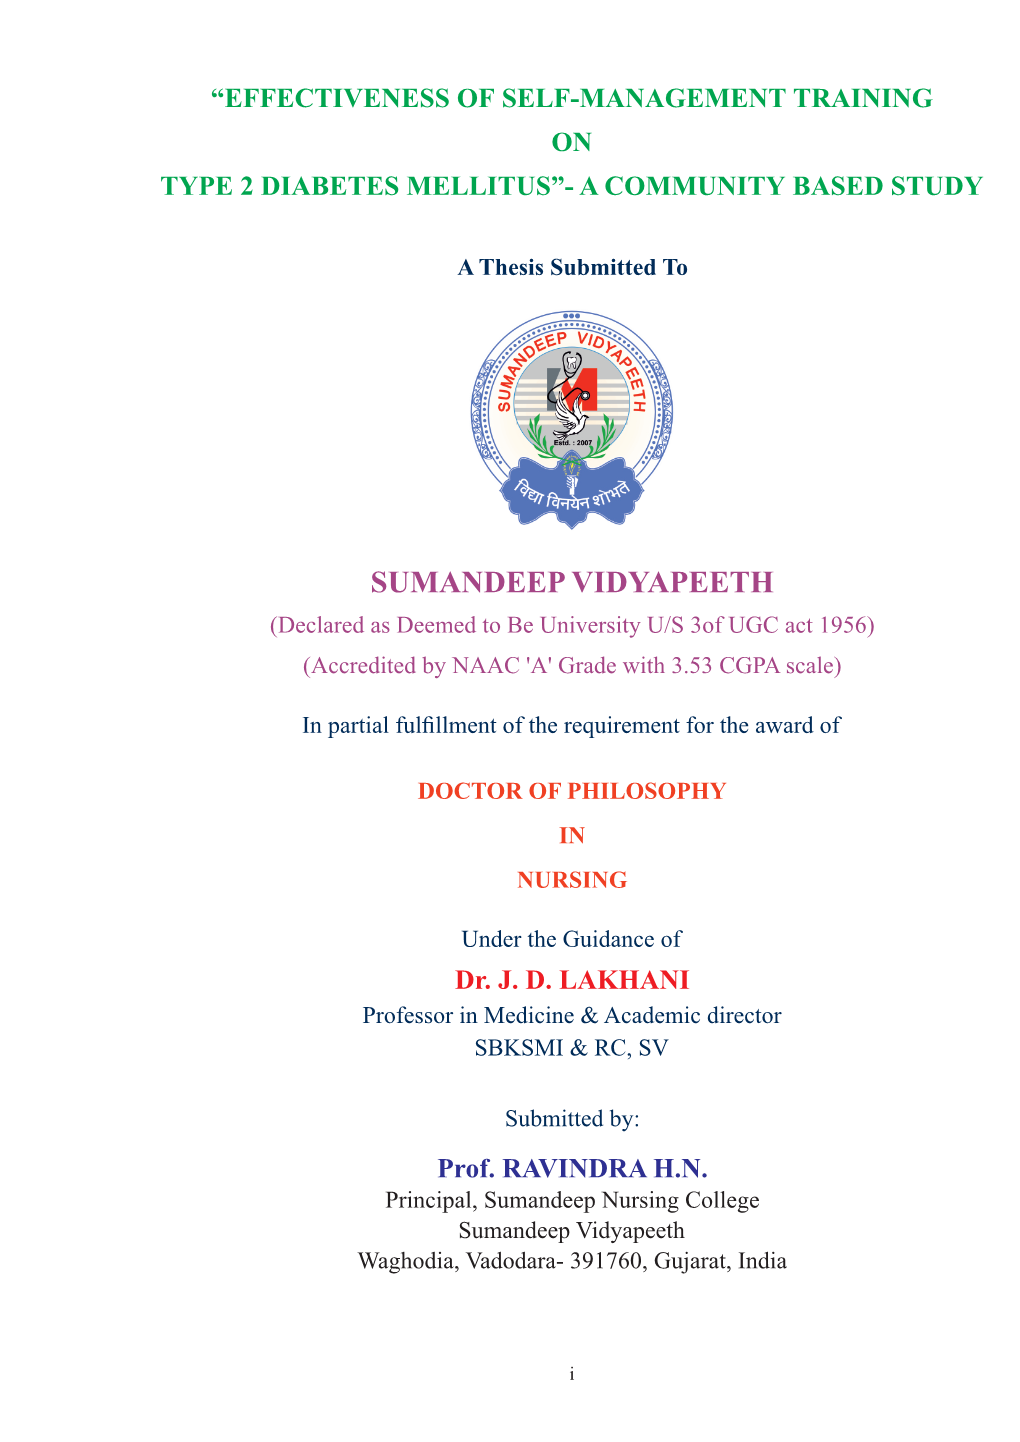 SUMANDEEP VIDYAPEETH (Declared As Deemed to Be University U/S 3Of UGC Act 1956) (Accredited by NAAC 'A' Grade with 3.53 CGPA Scale)